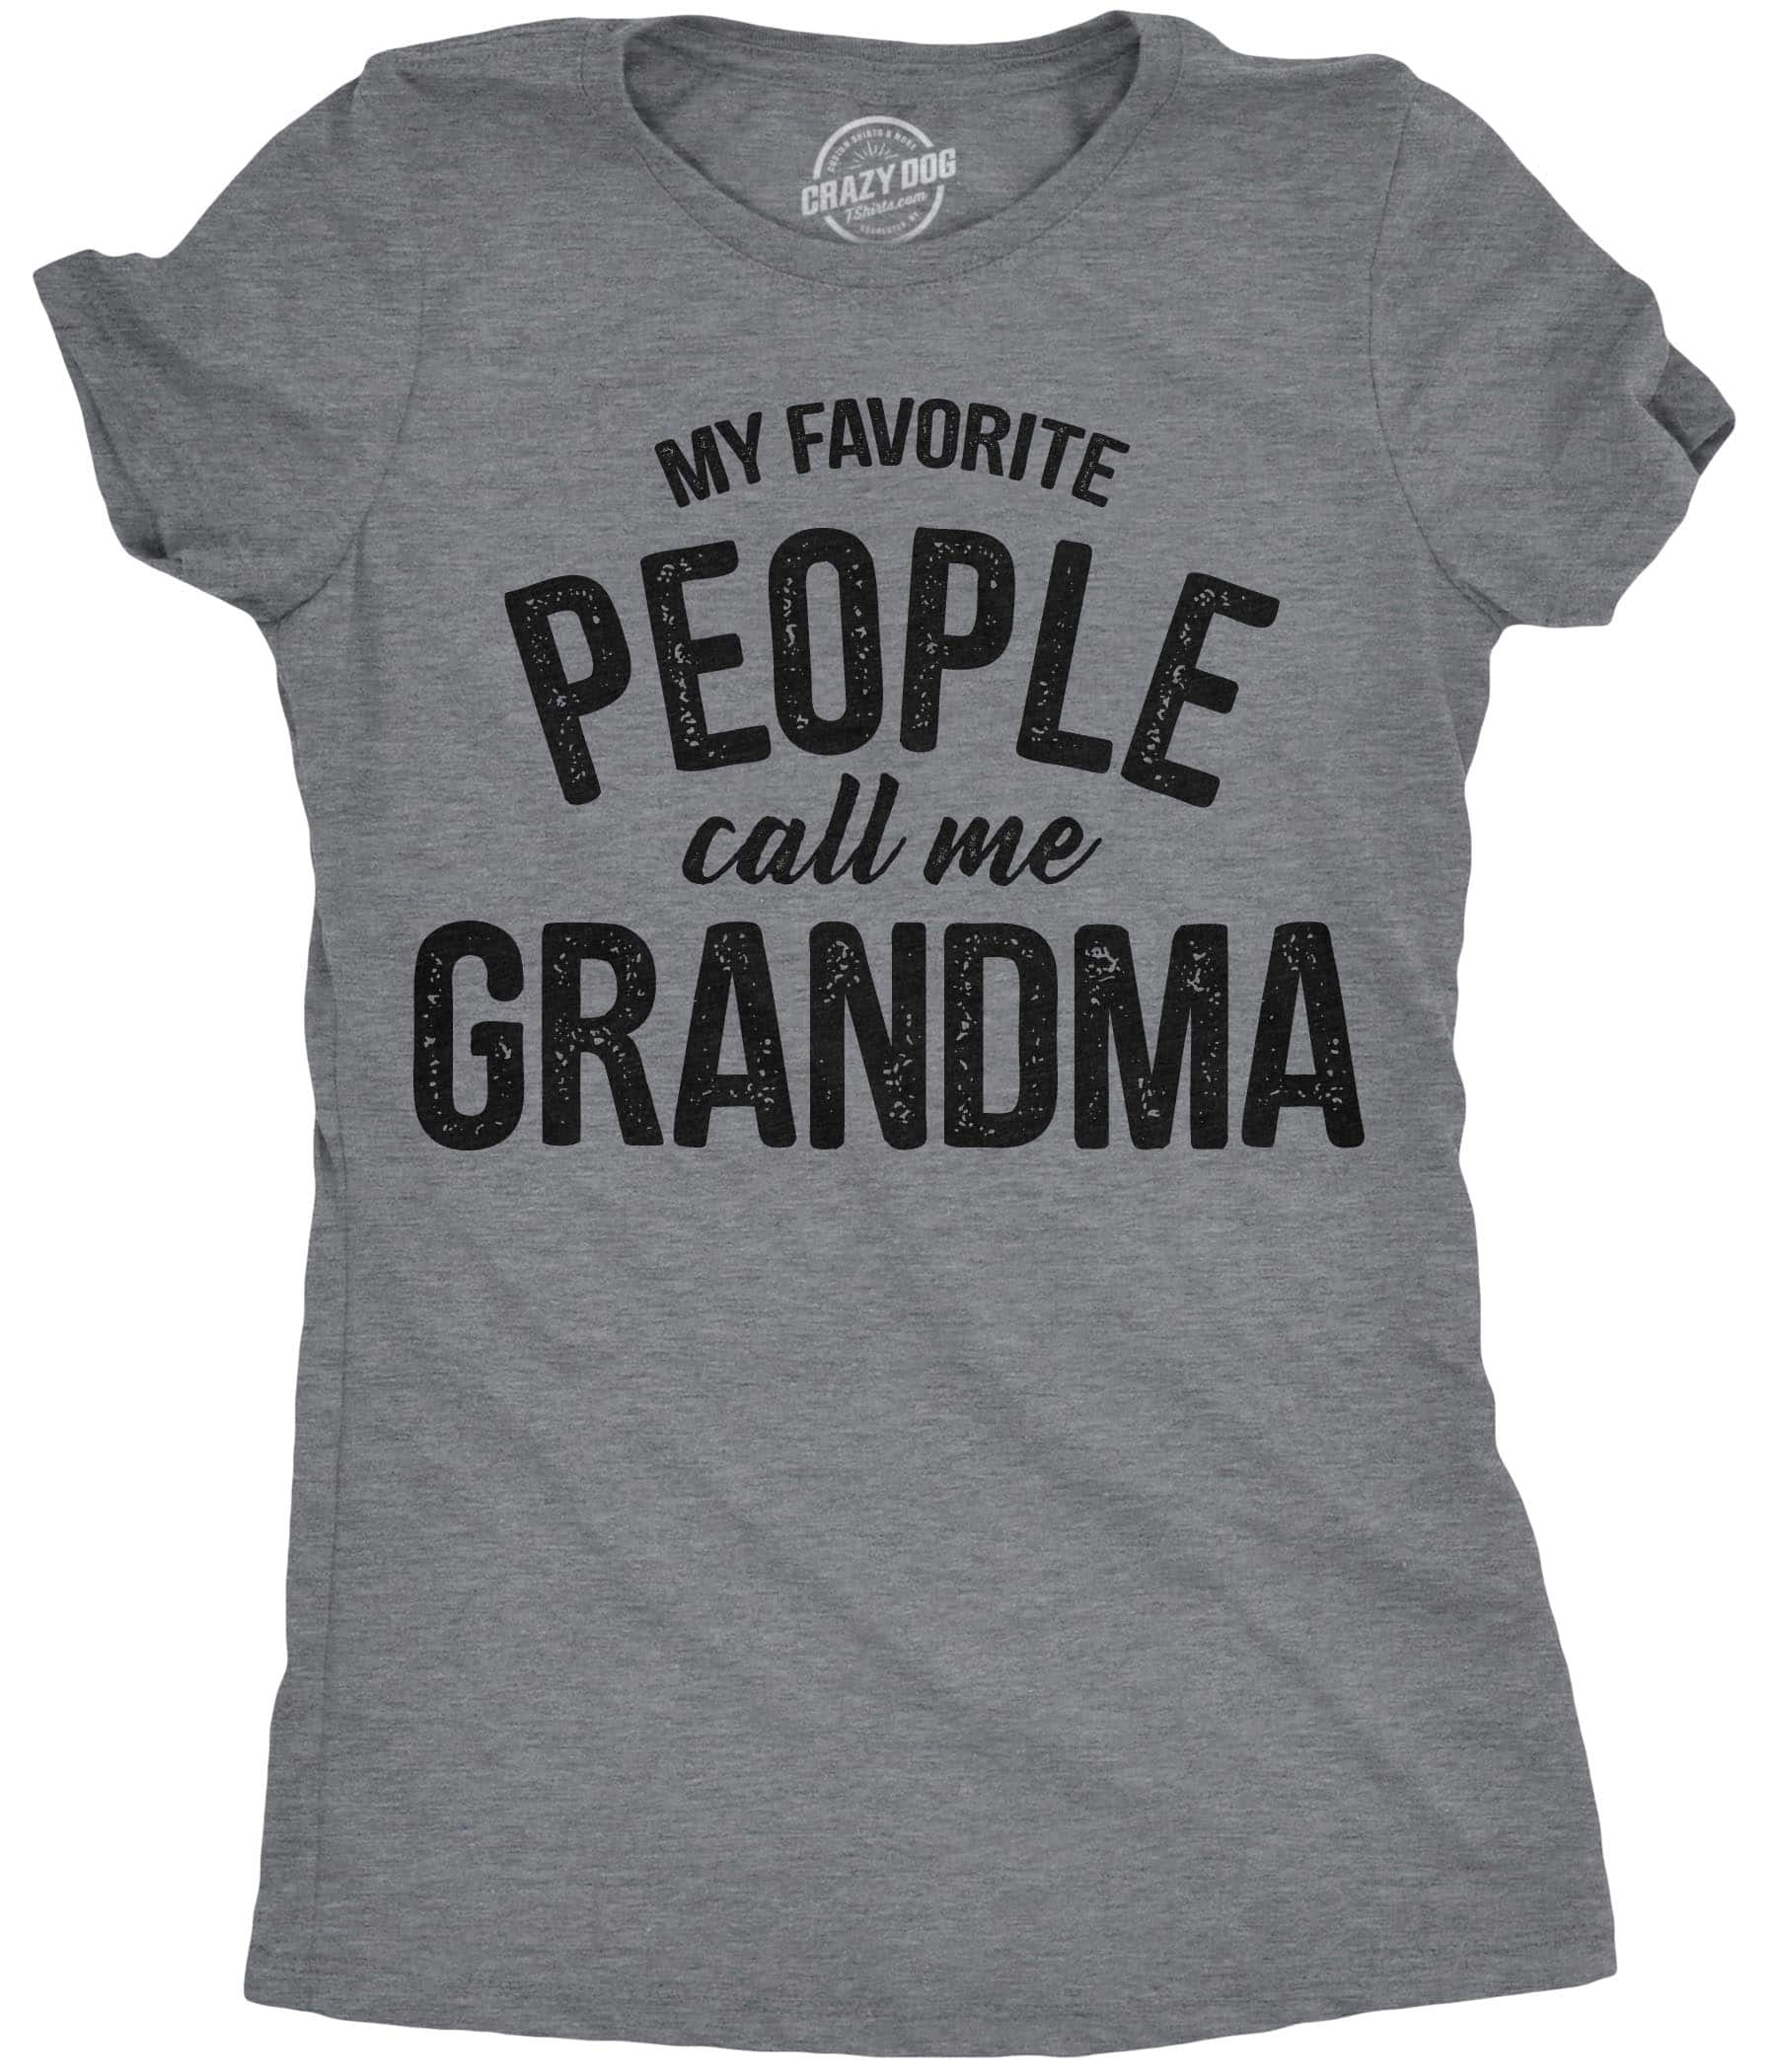 gift-ideas-for-grandparents-t-shirt